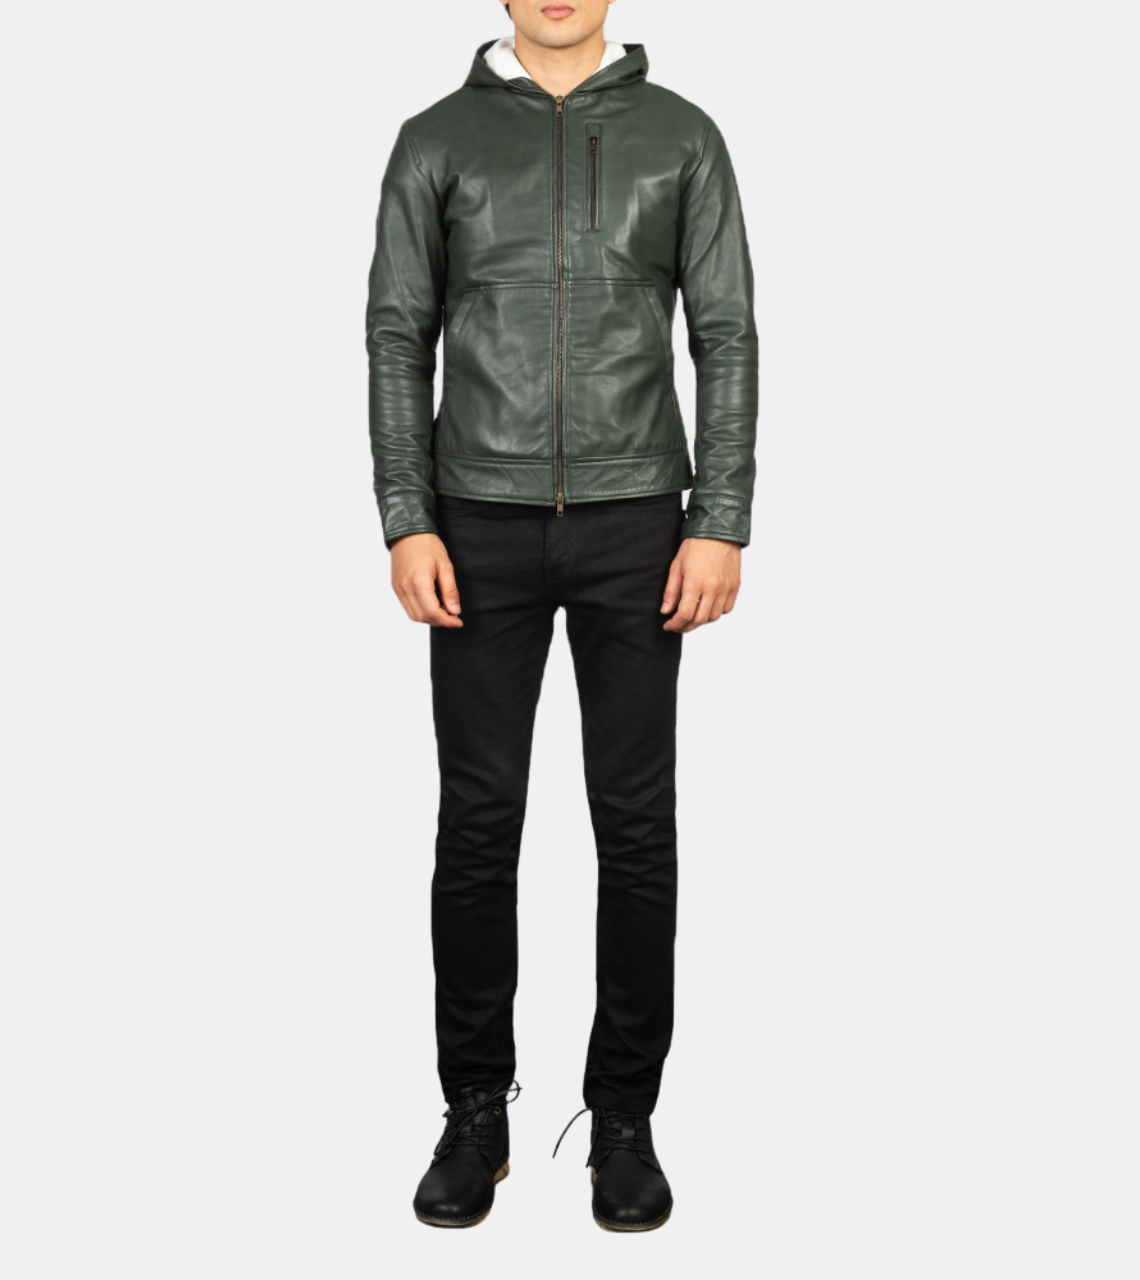 Men's Green Hooded Leather Jacket